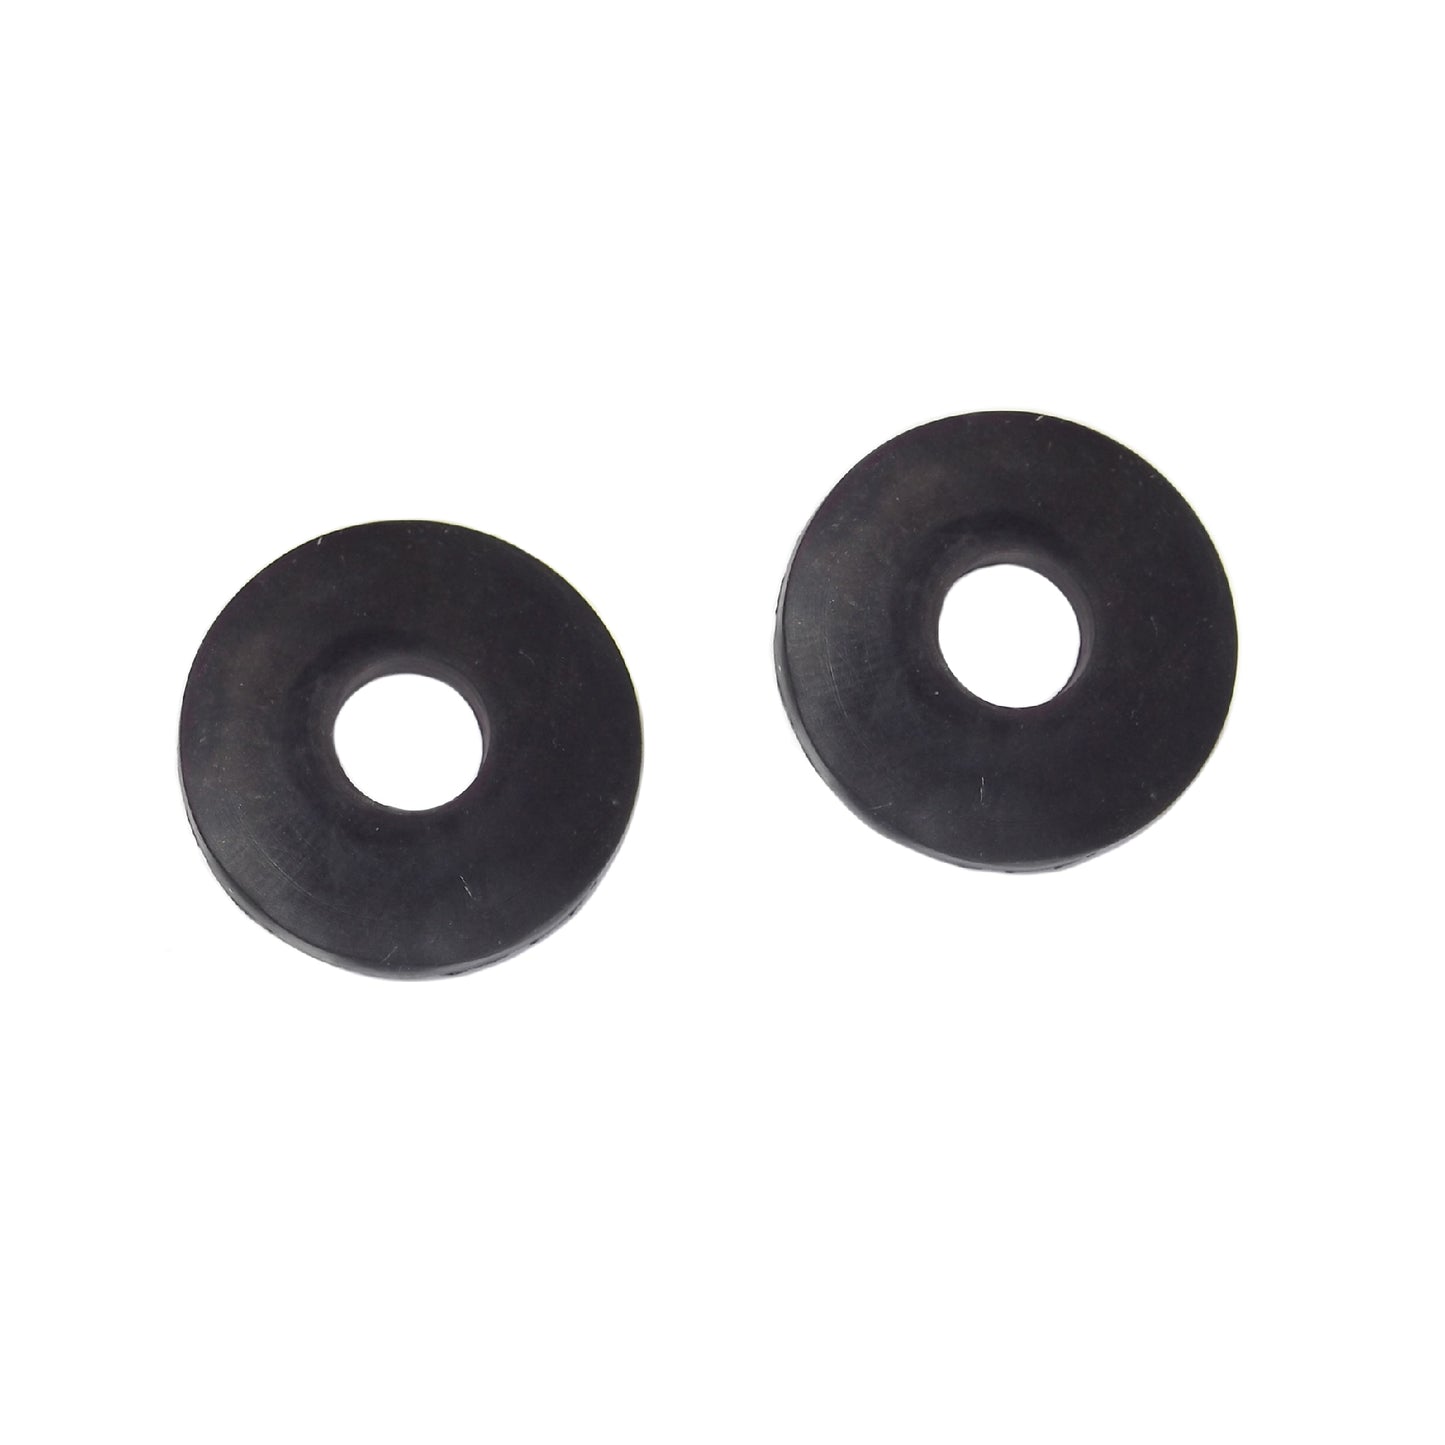 Rubber Washer for Rack Handle Assy for FC-420 Air Circulator